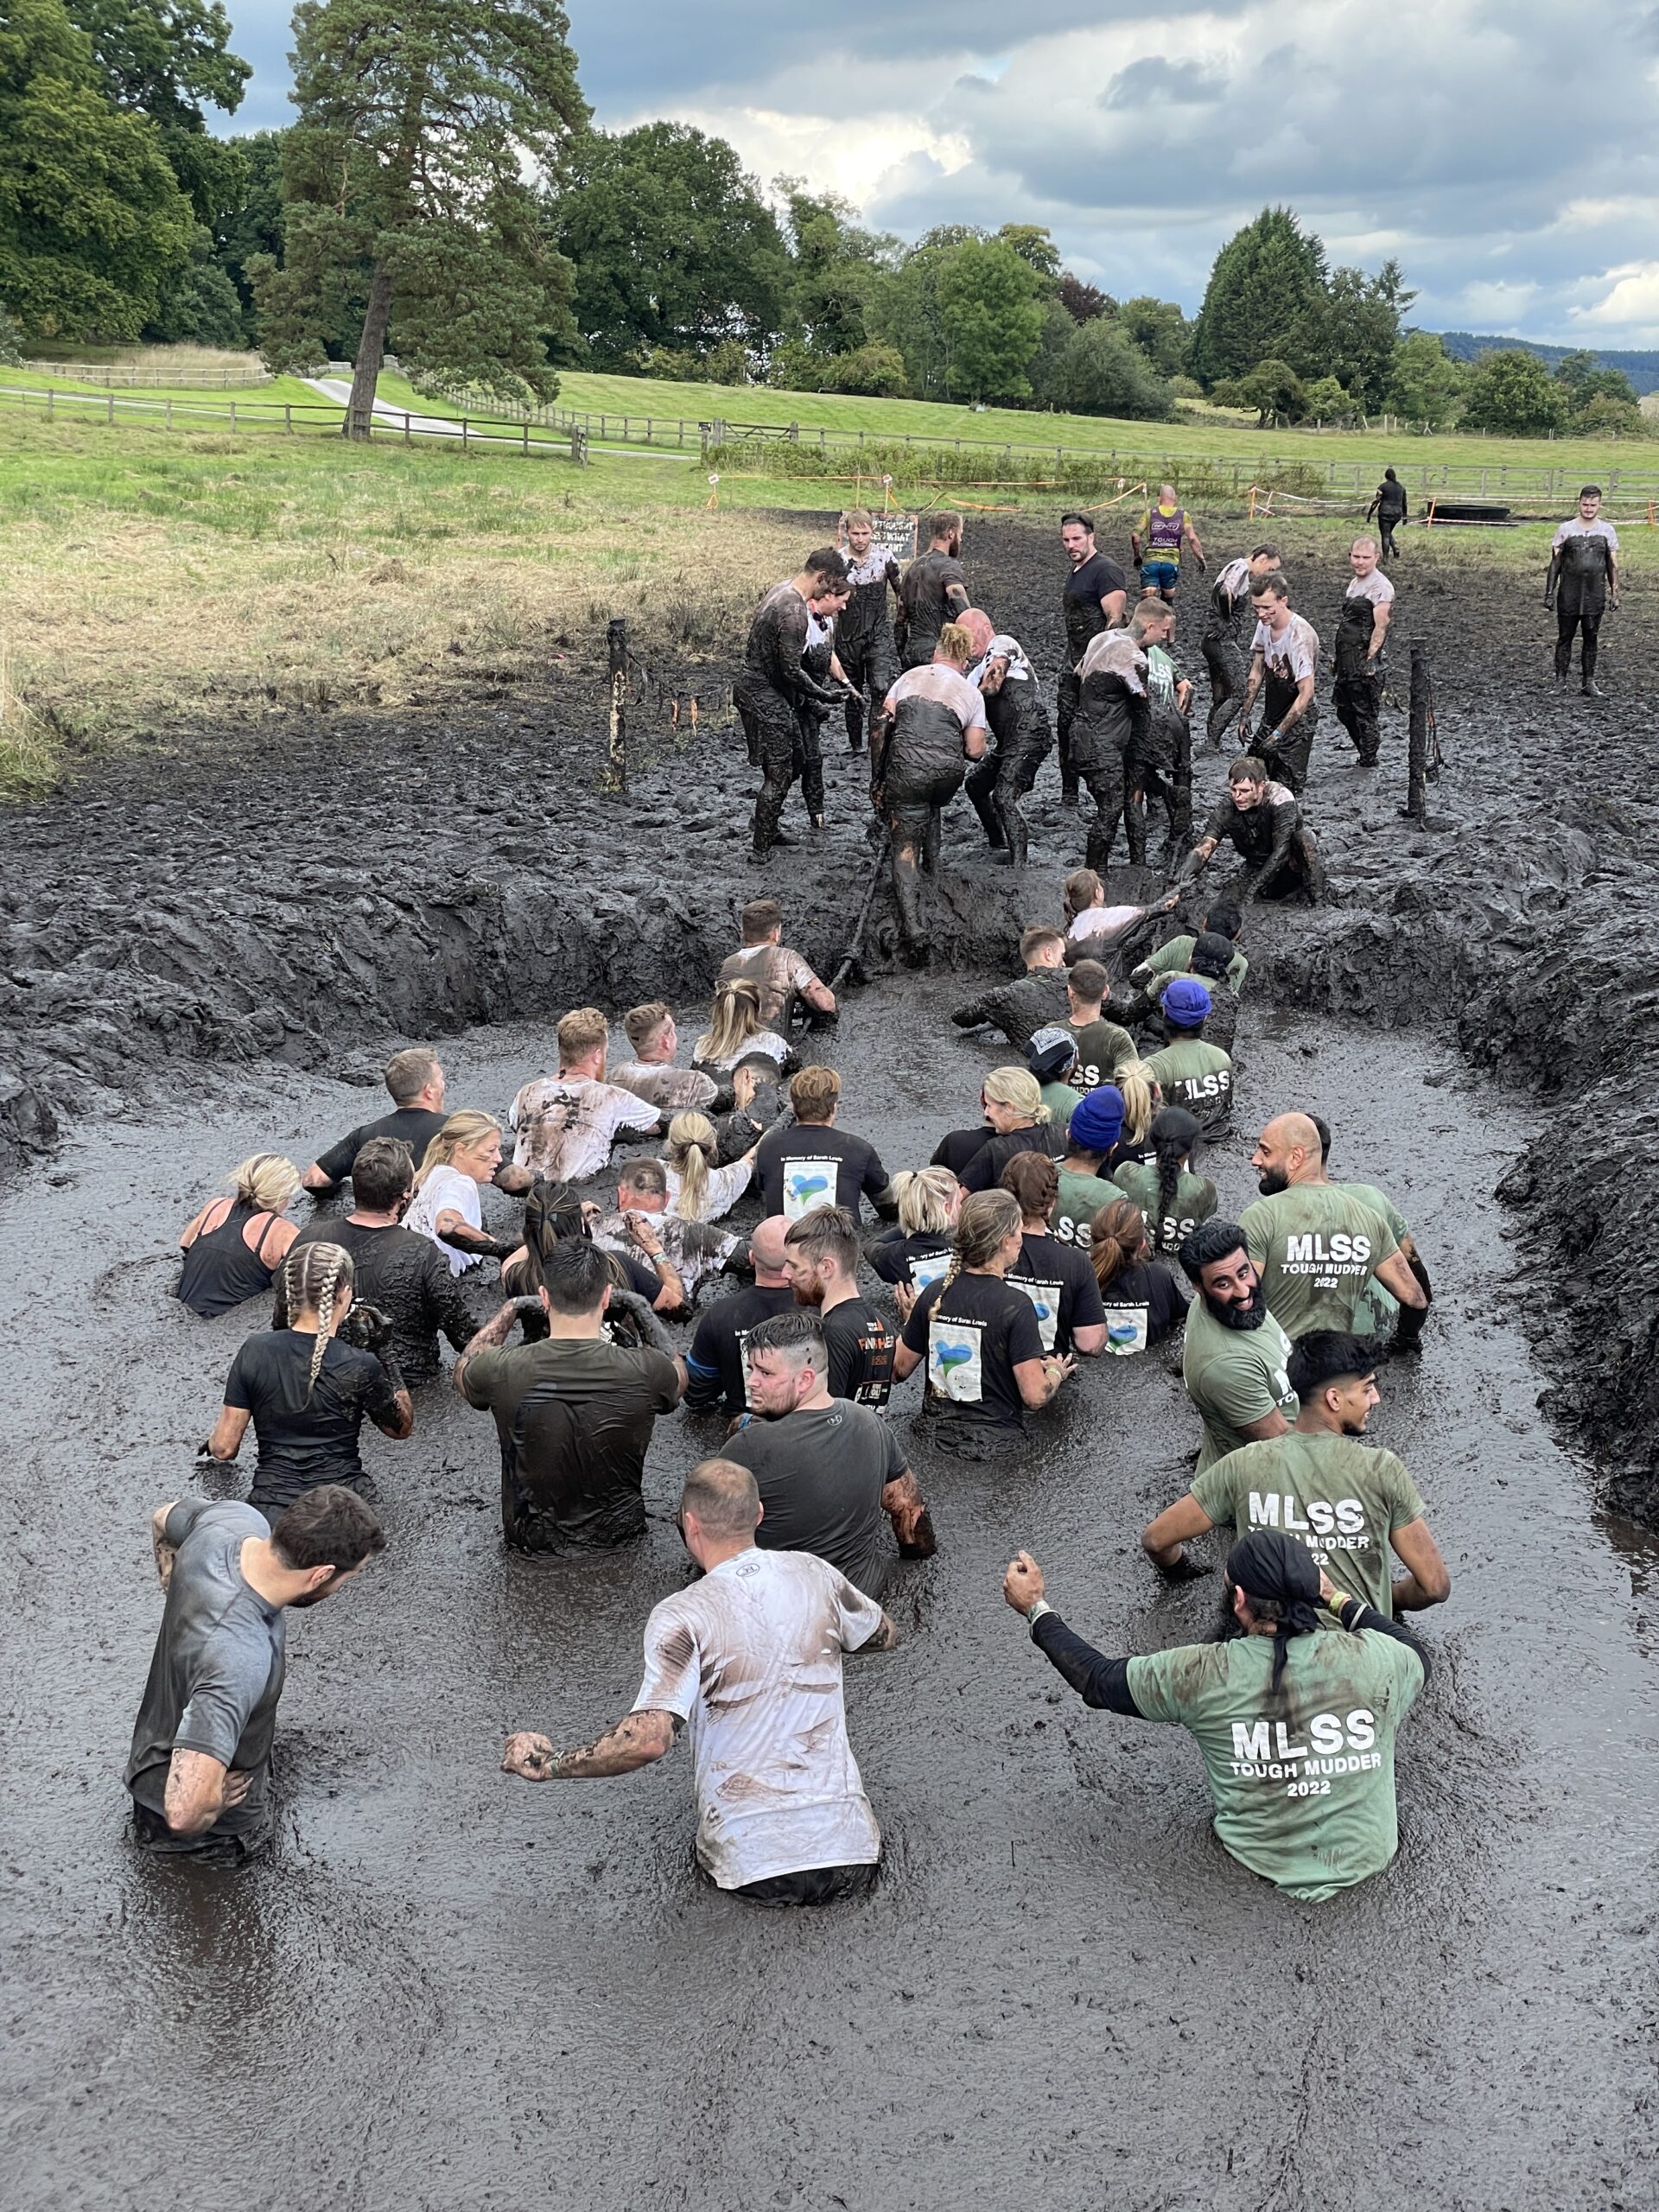 Tough Mudder is coming back to Manchester